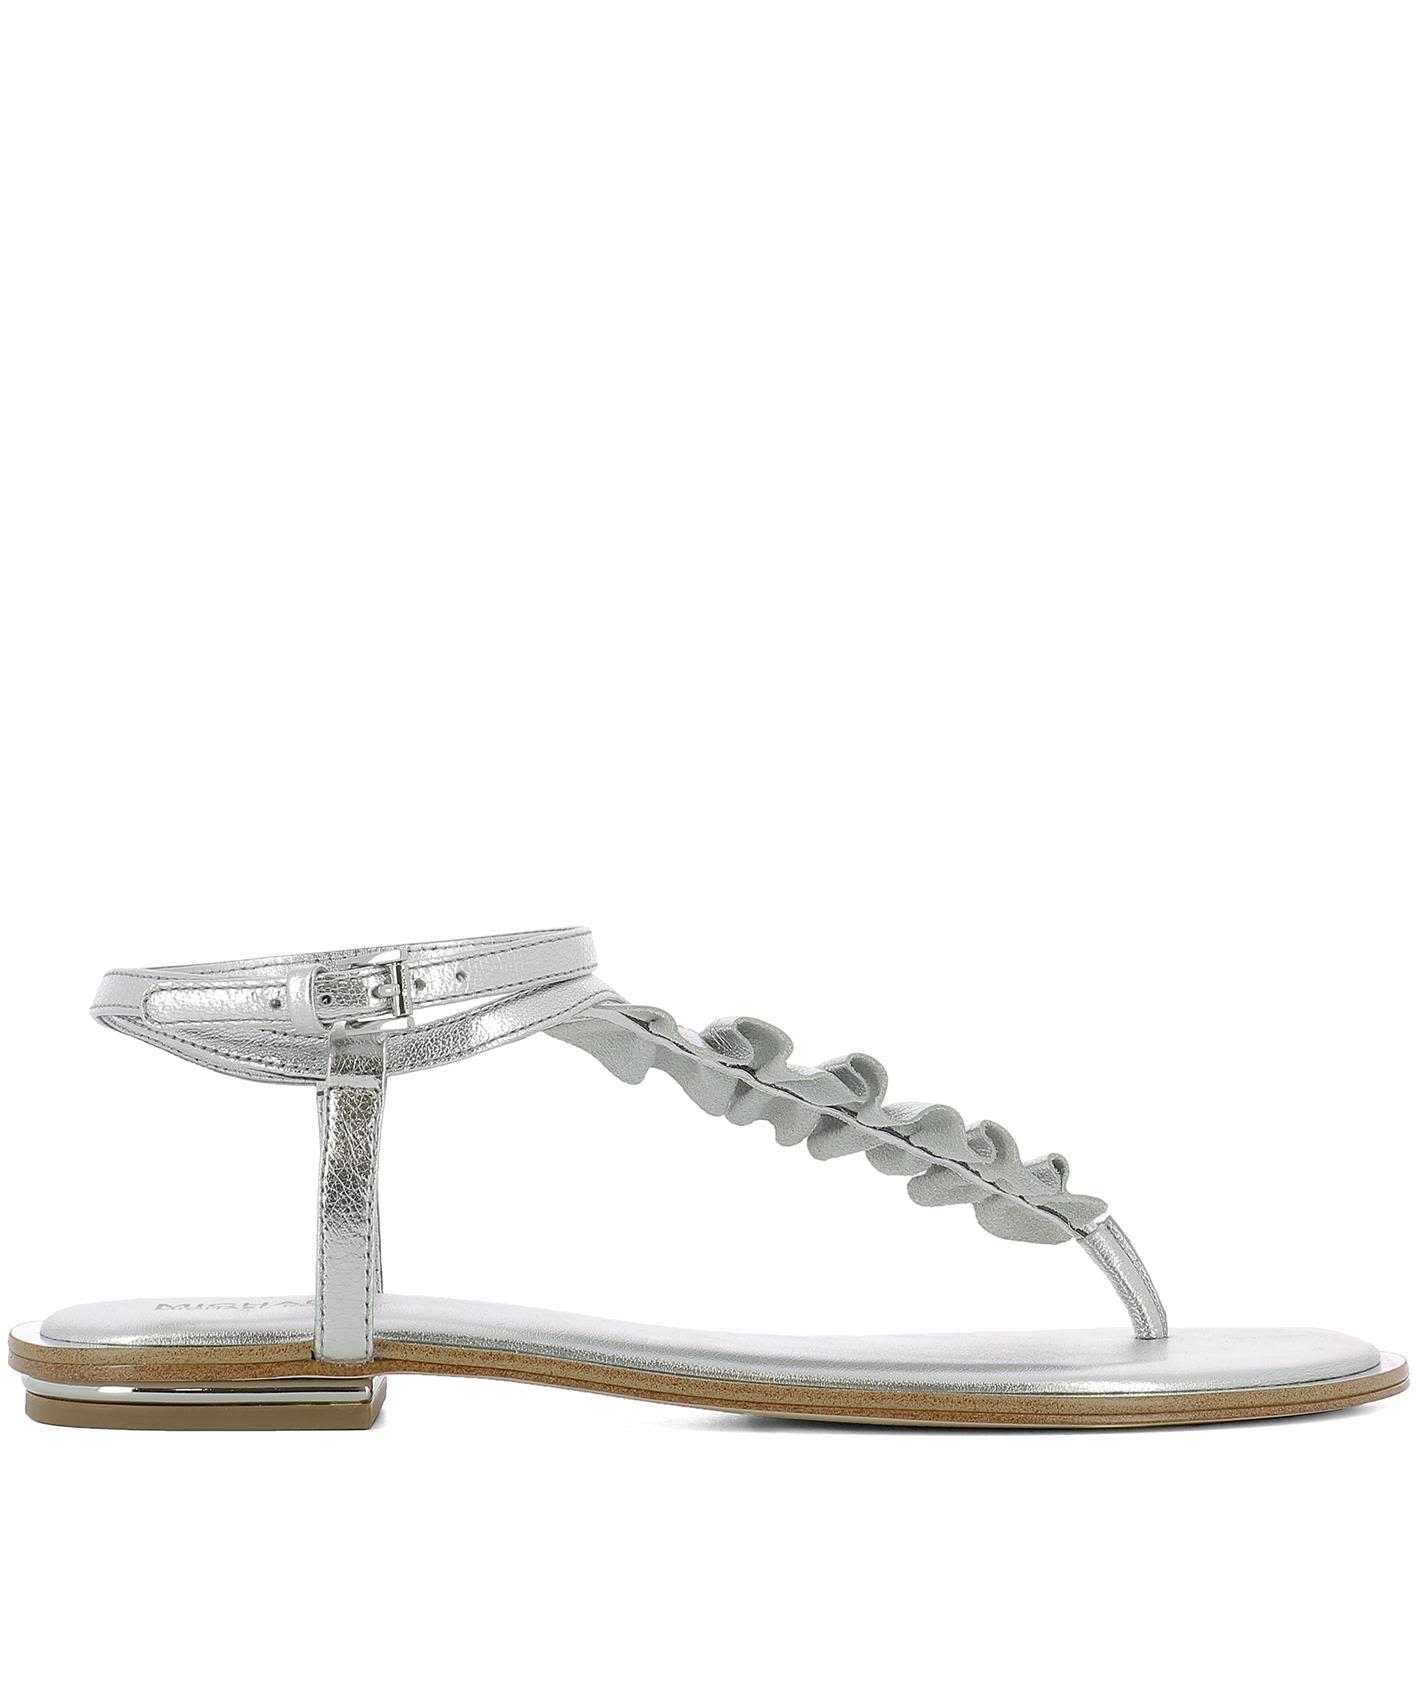 MICHAEL KORS SILVER LEATHER BELLA THONG SANDALS,10606874